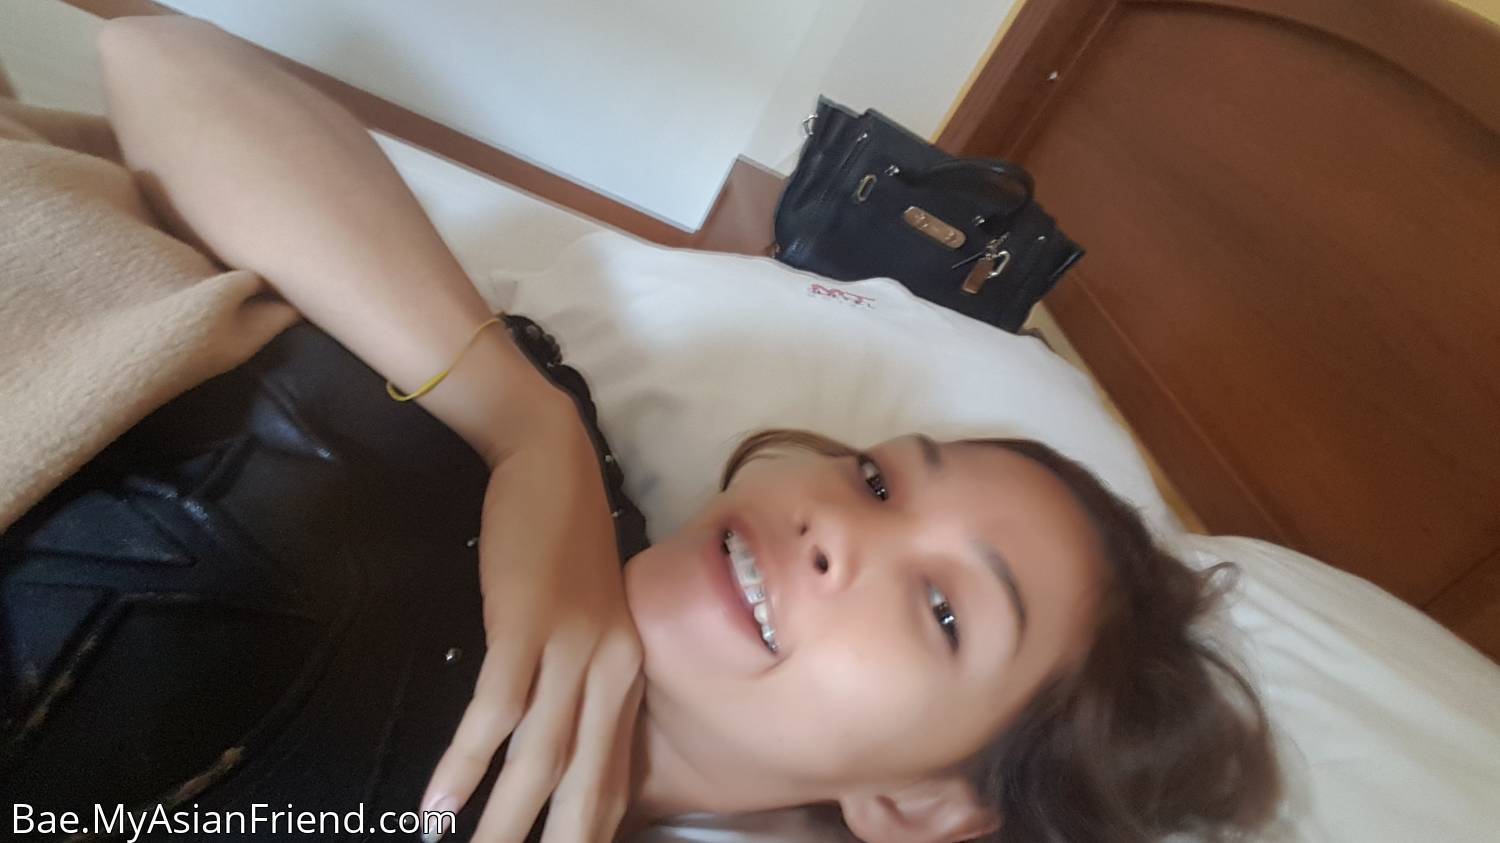 Petite Bae wakes up lonely in bed in Pattaya